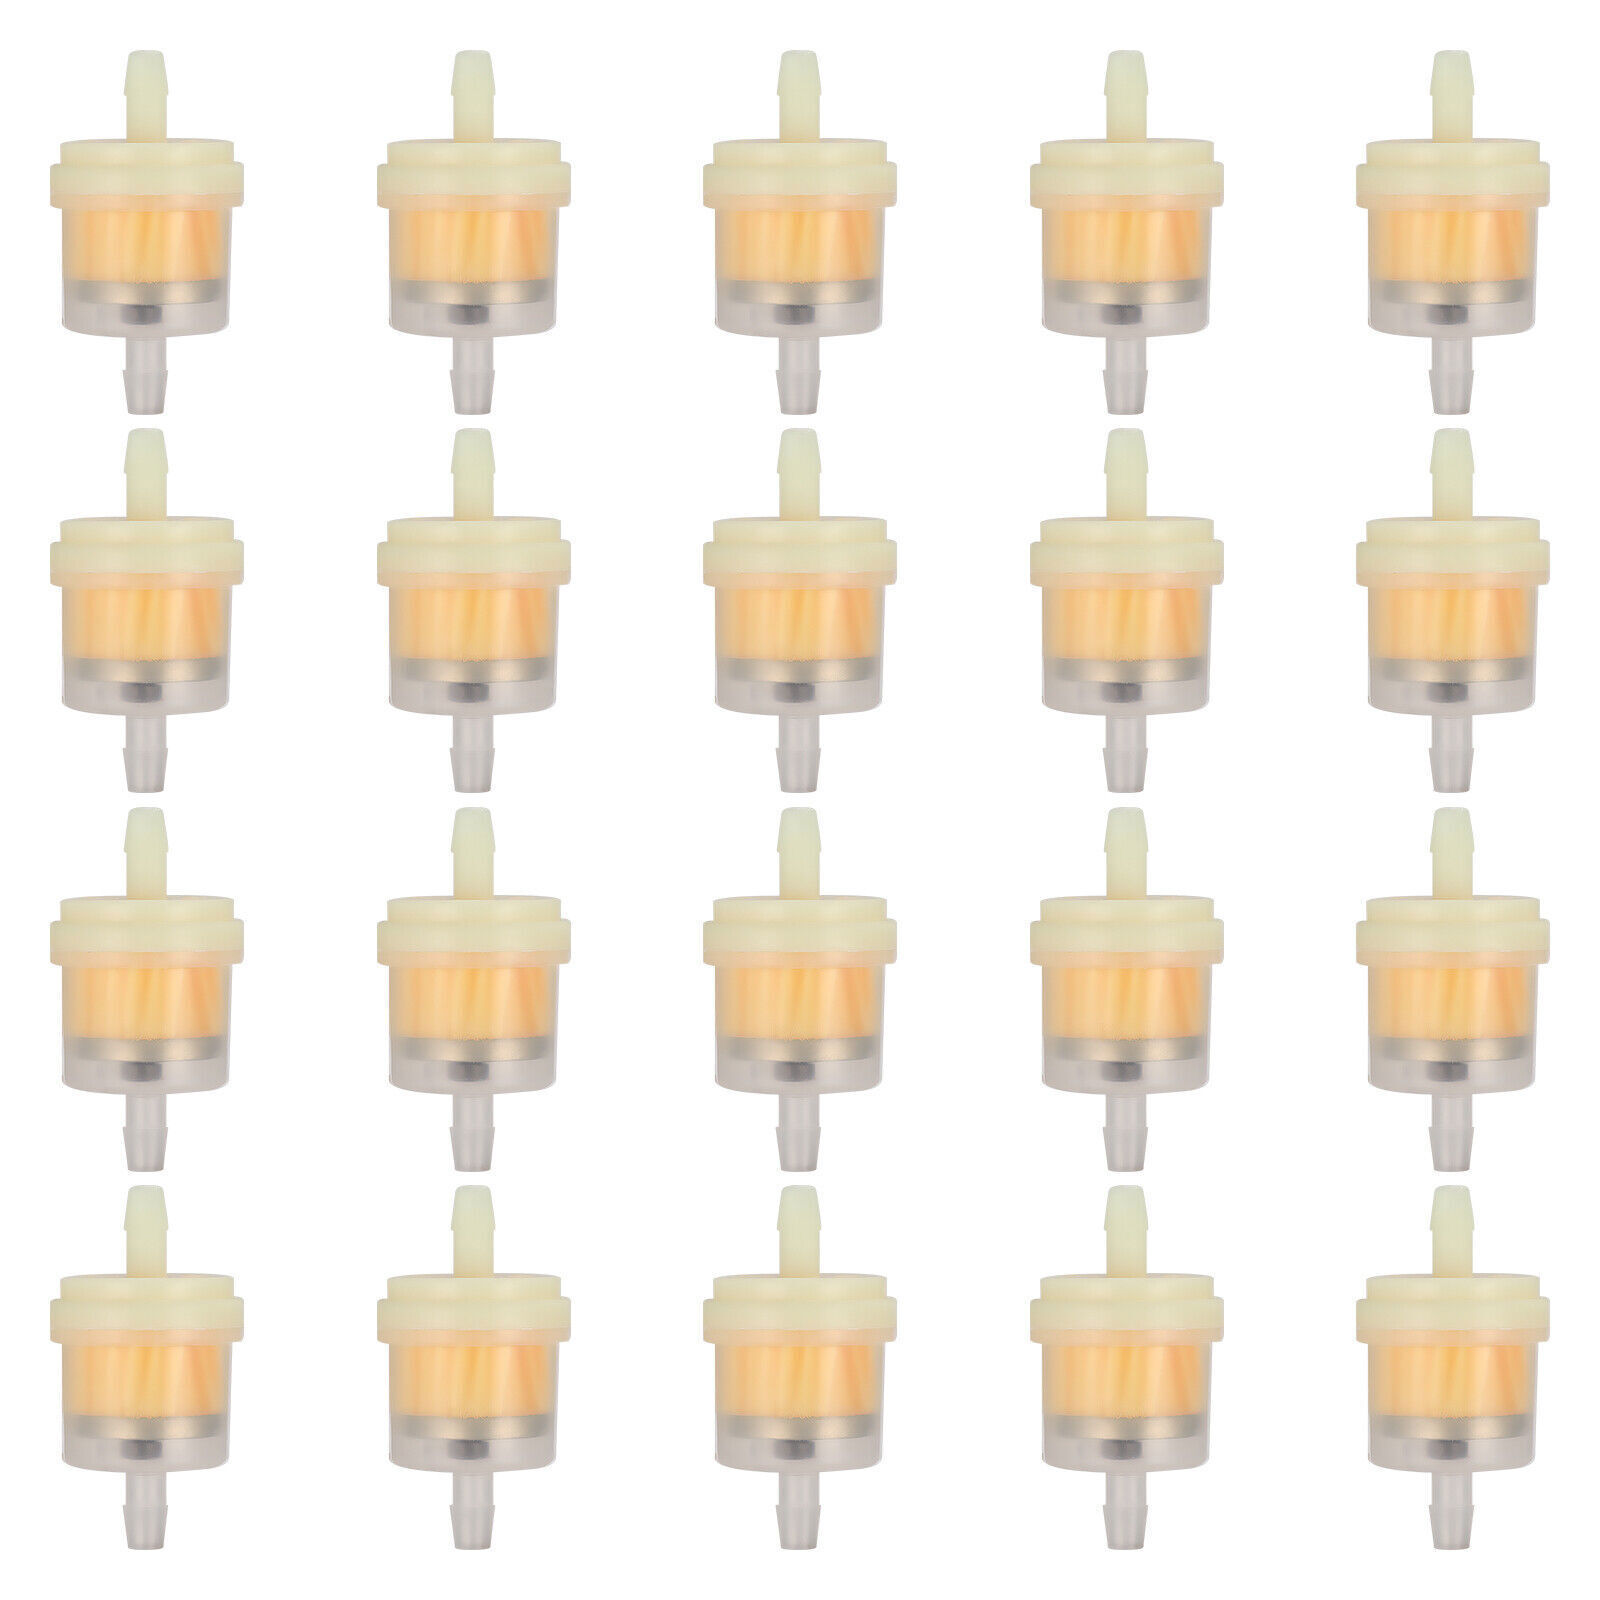 20PCS Motor Inline Gas Oil Fuel Filter Small Engine For 1/4'' 5/16